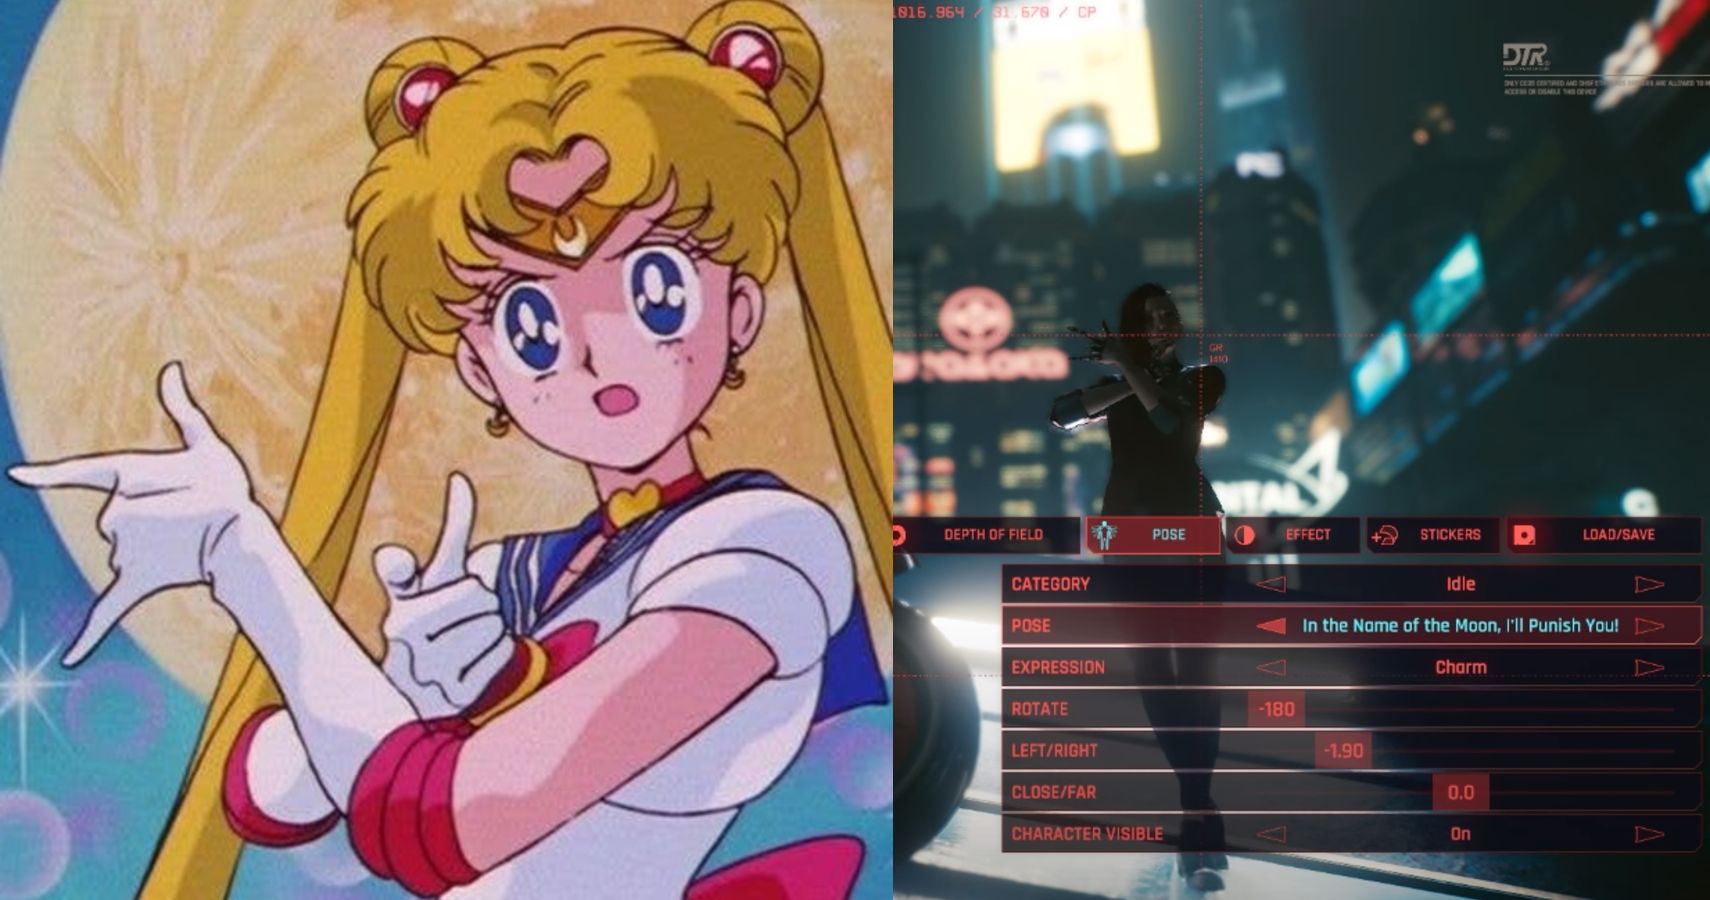 Collage of Sailor Moon and the similar photo mode pose in Cyberpunk 2077.